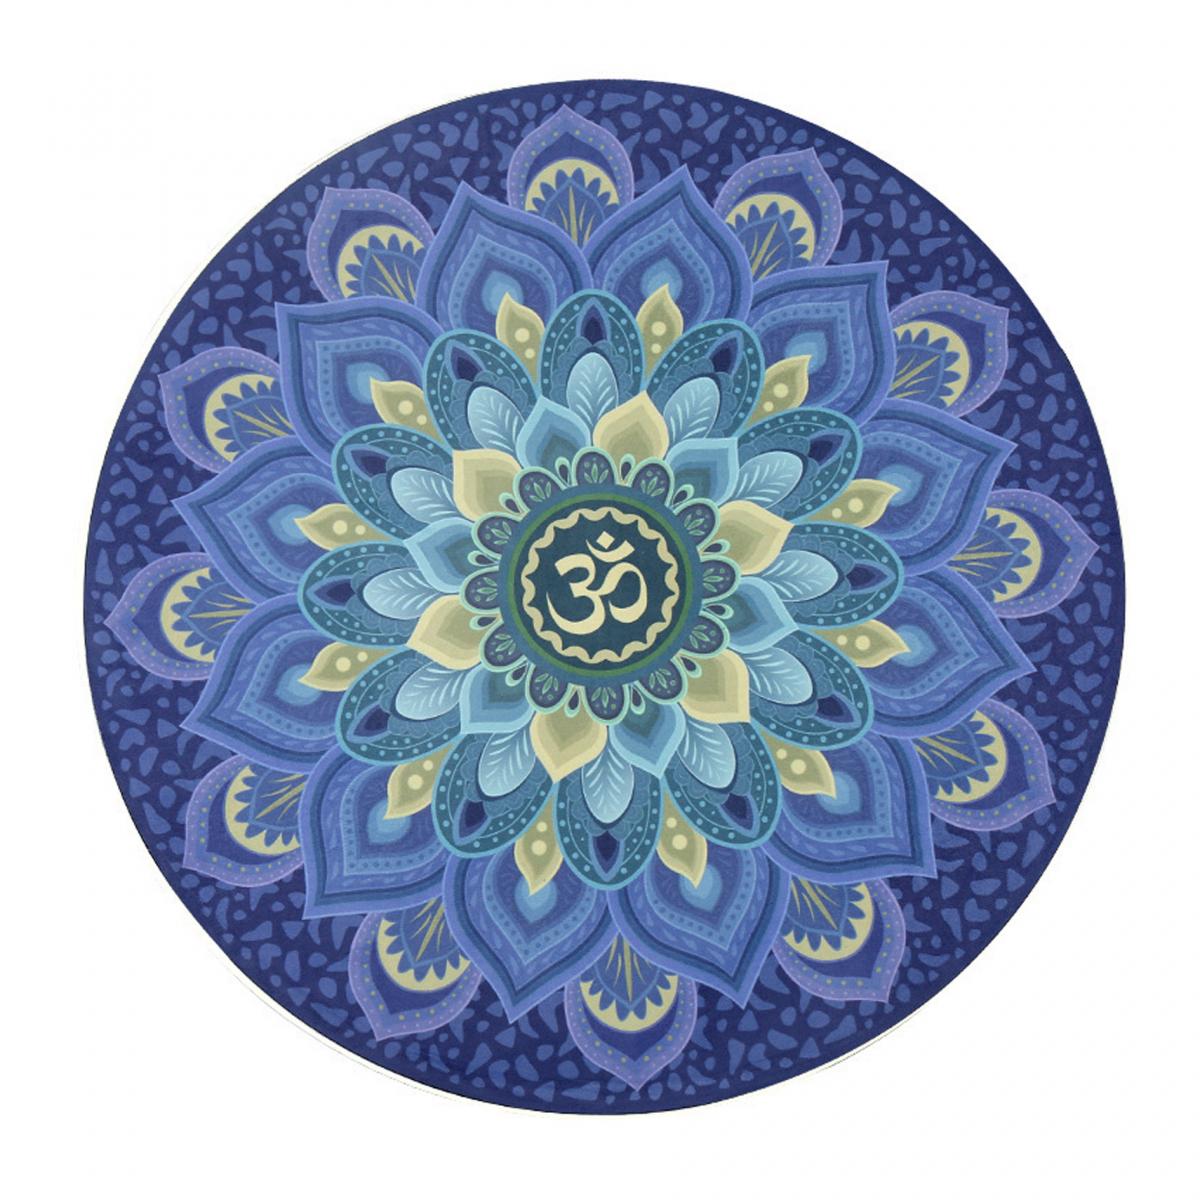 [purple + blue] Round Yoga Mat Meditation Floor Soft Seat Pad Circular Natural Rubber with microfiber surface